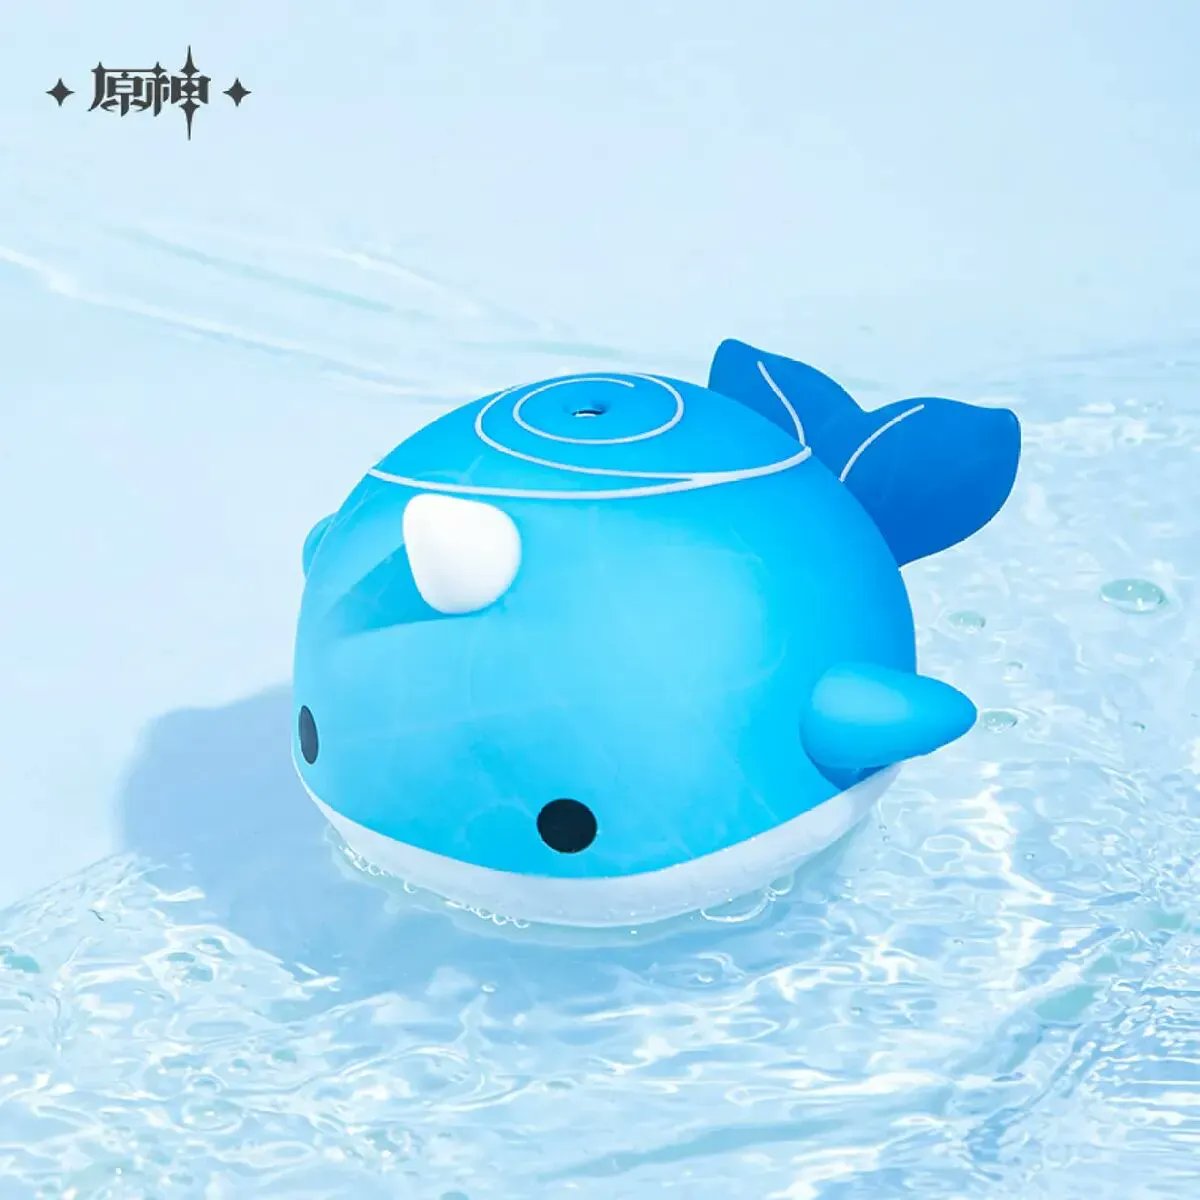 Hoyoverse will be releasing a brand new Genshin Impact humidifier featuring an adorable rendition of Childe's hydro narwhal, the Monoceros Caeli!
Release Date: TBA
bit.ly/42SJq8Y